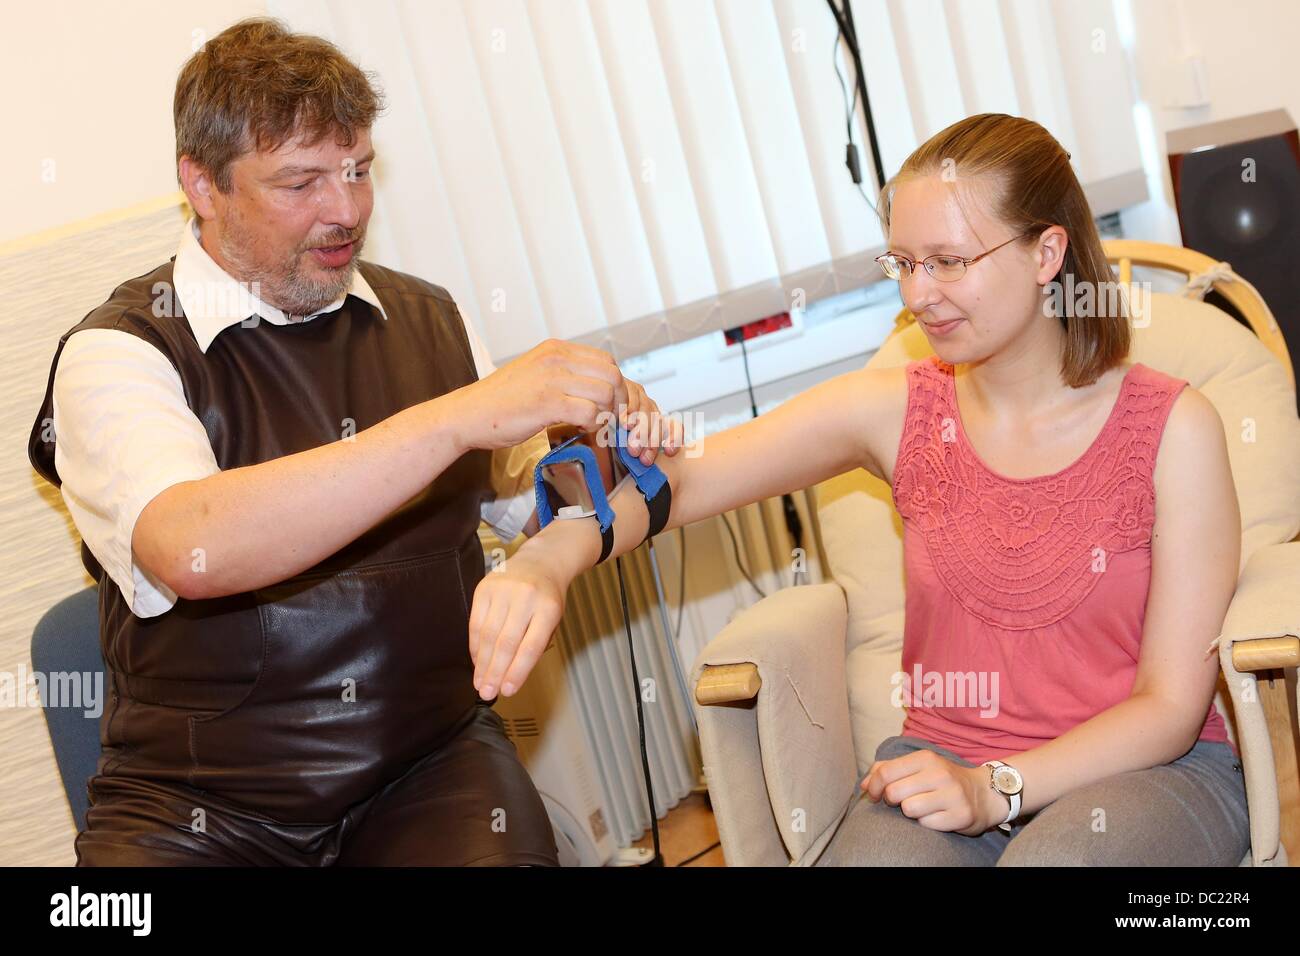 Scientist Christian Kaernbach specialising in the field of goose bumps (horripilation) attaches a goosepimples camera to an arm of a woman at the Leipniz Institute for Science and Mathemaics Education of the University of Kiel, Germany, 23 July 2013. Kaernbach researches on reactions of skin to emotional stimulation with his self-developed camera. Photo: Malte Christians Stock Photo